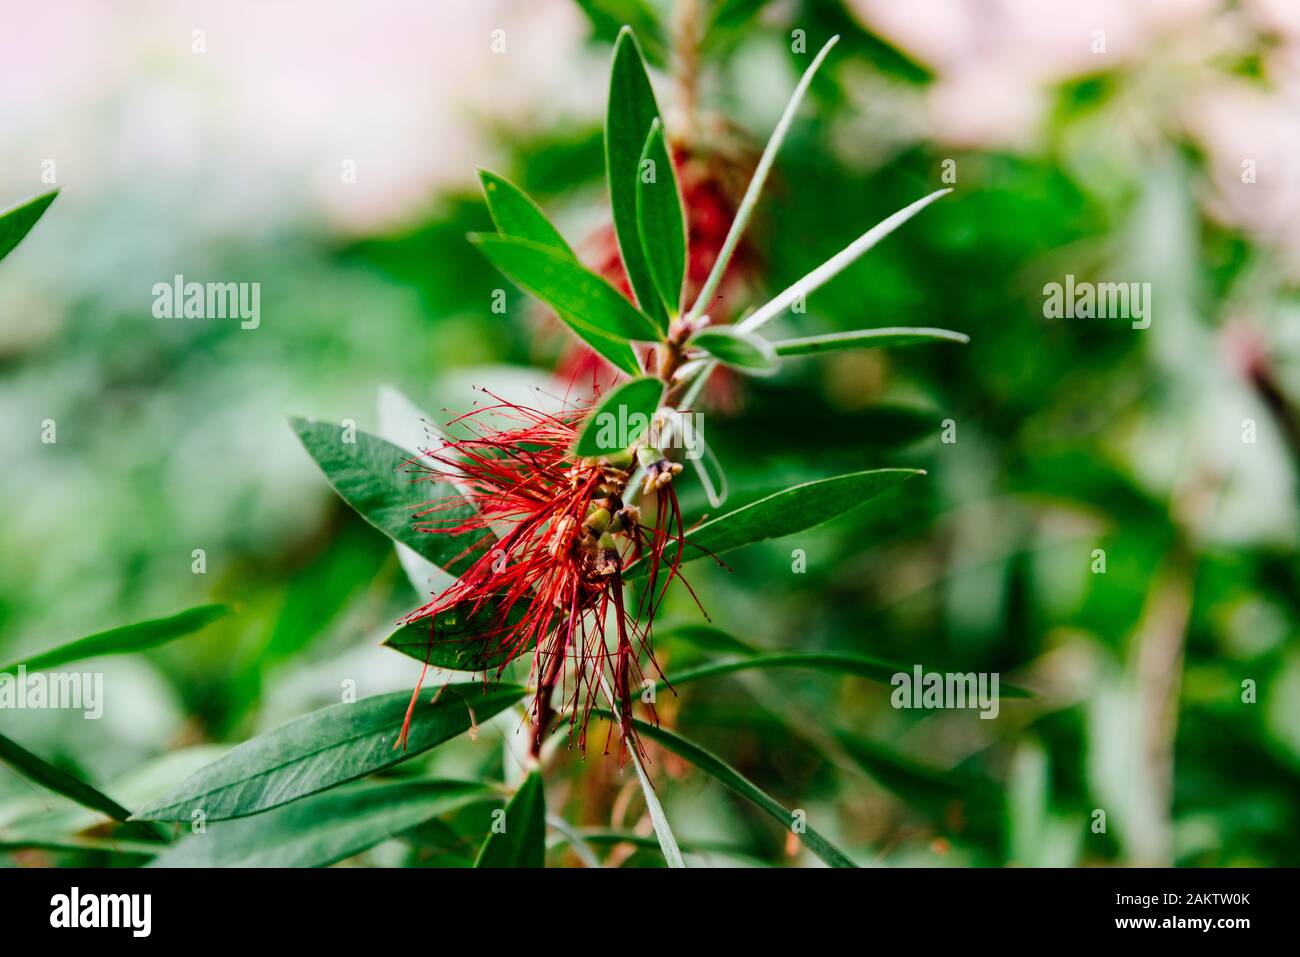 Close up view of Callistemon Citrinus or Melaleuca citrina, commonly known as common red, crimson or lemon bottlebrush, is a plant in the myrtle famil Stock Photo